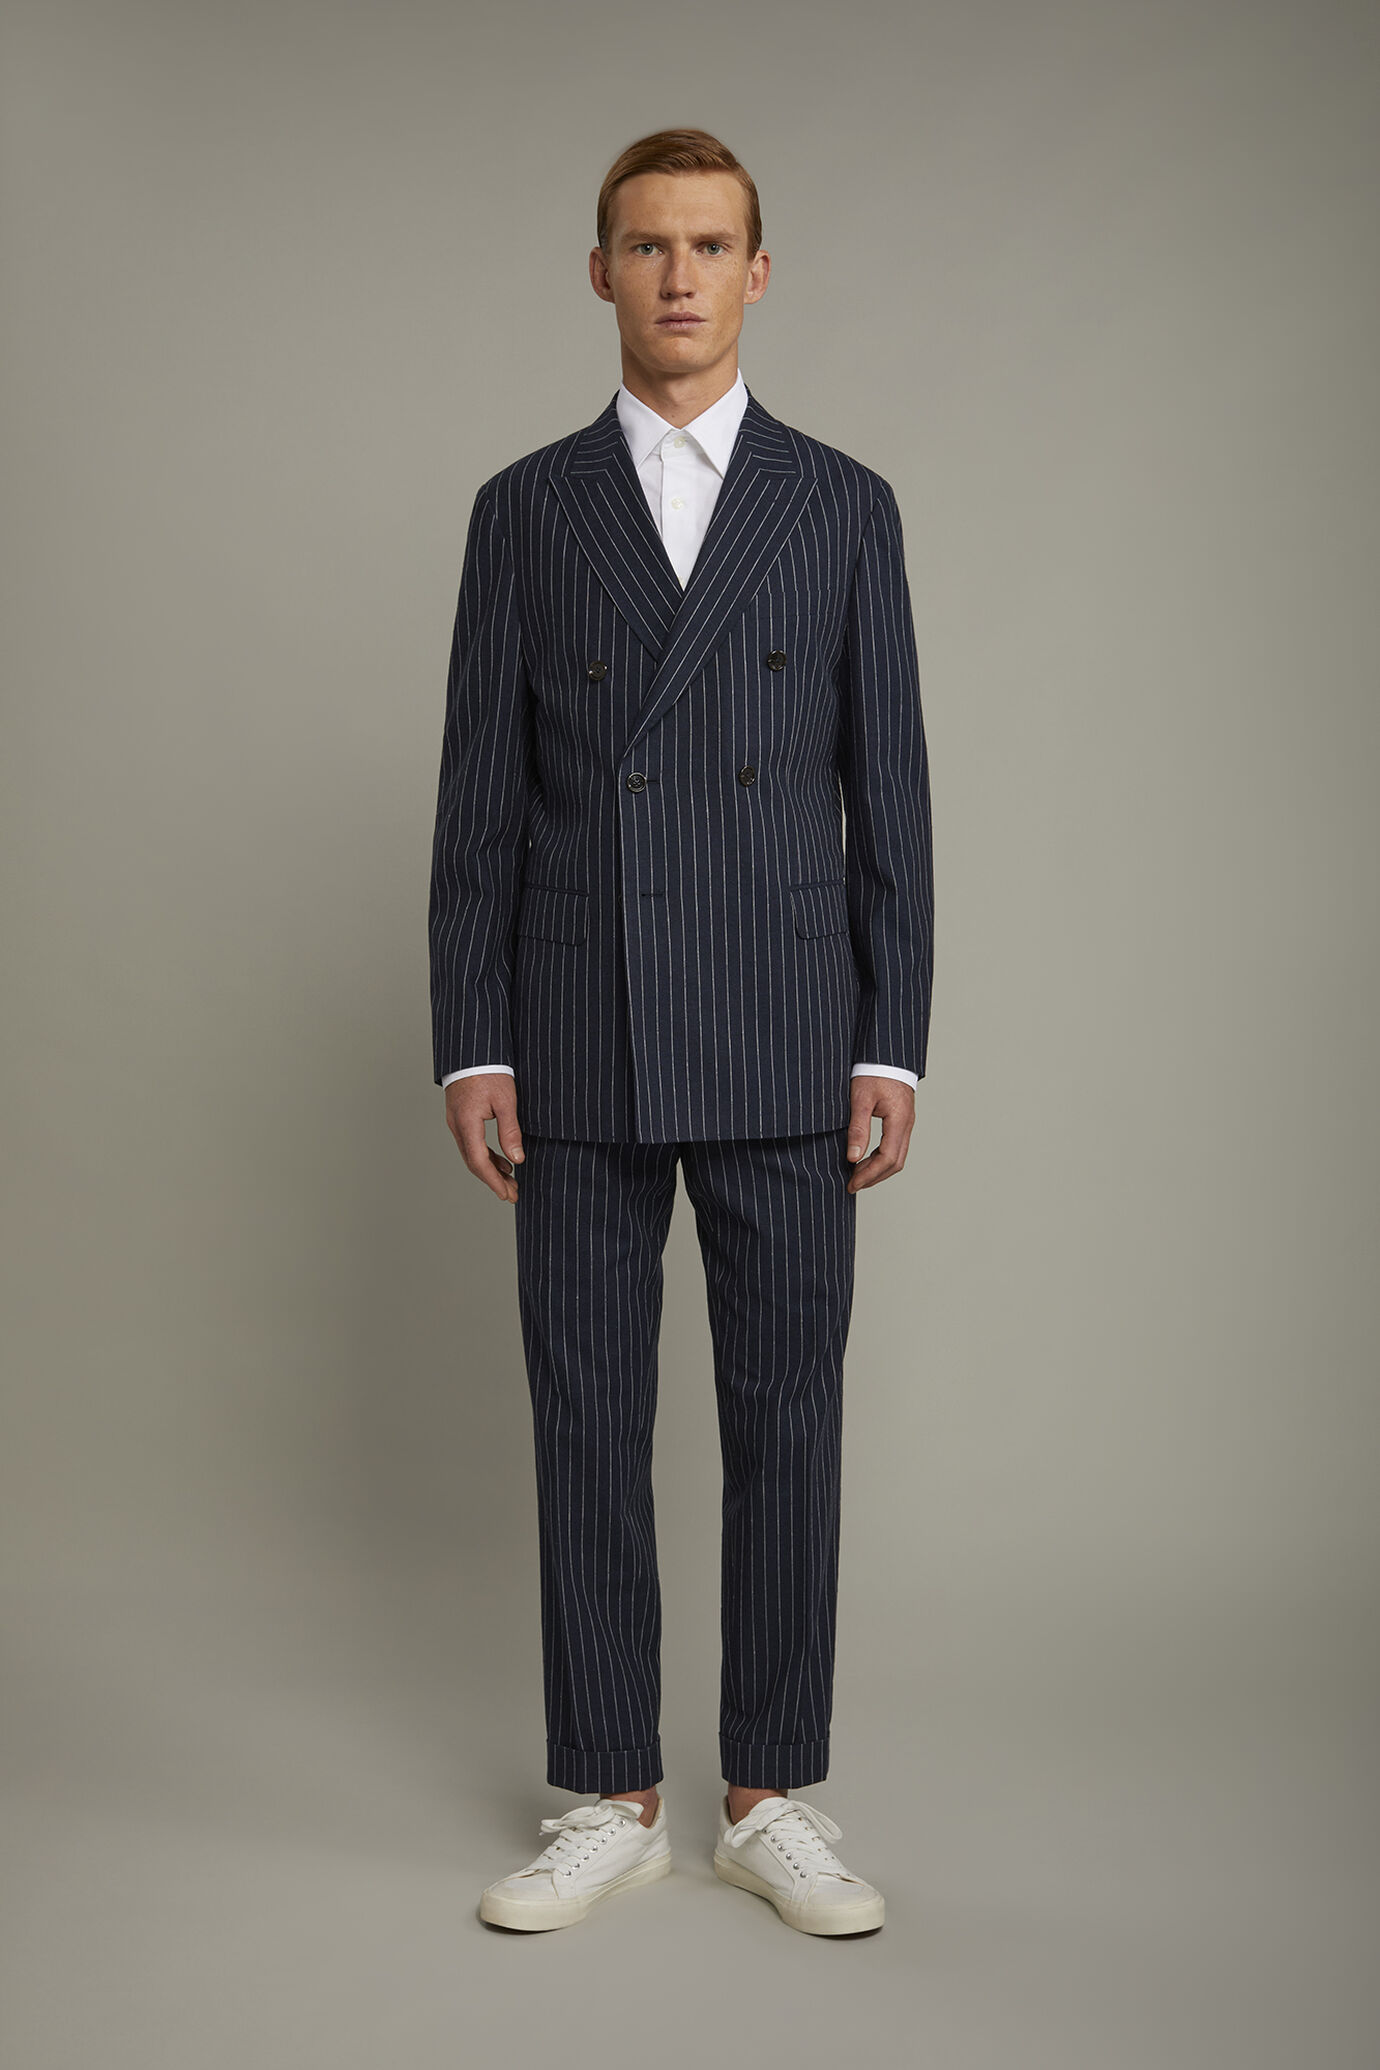 Men's classic double pinces trousers linen and cotton fabric with regular fit pinstripe design image number 2